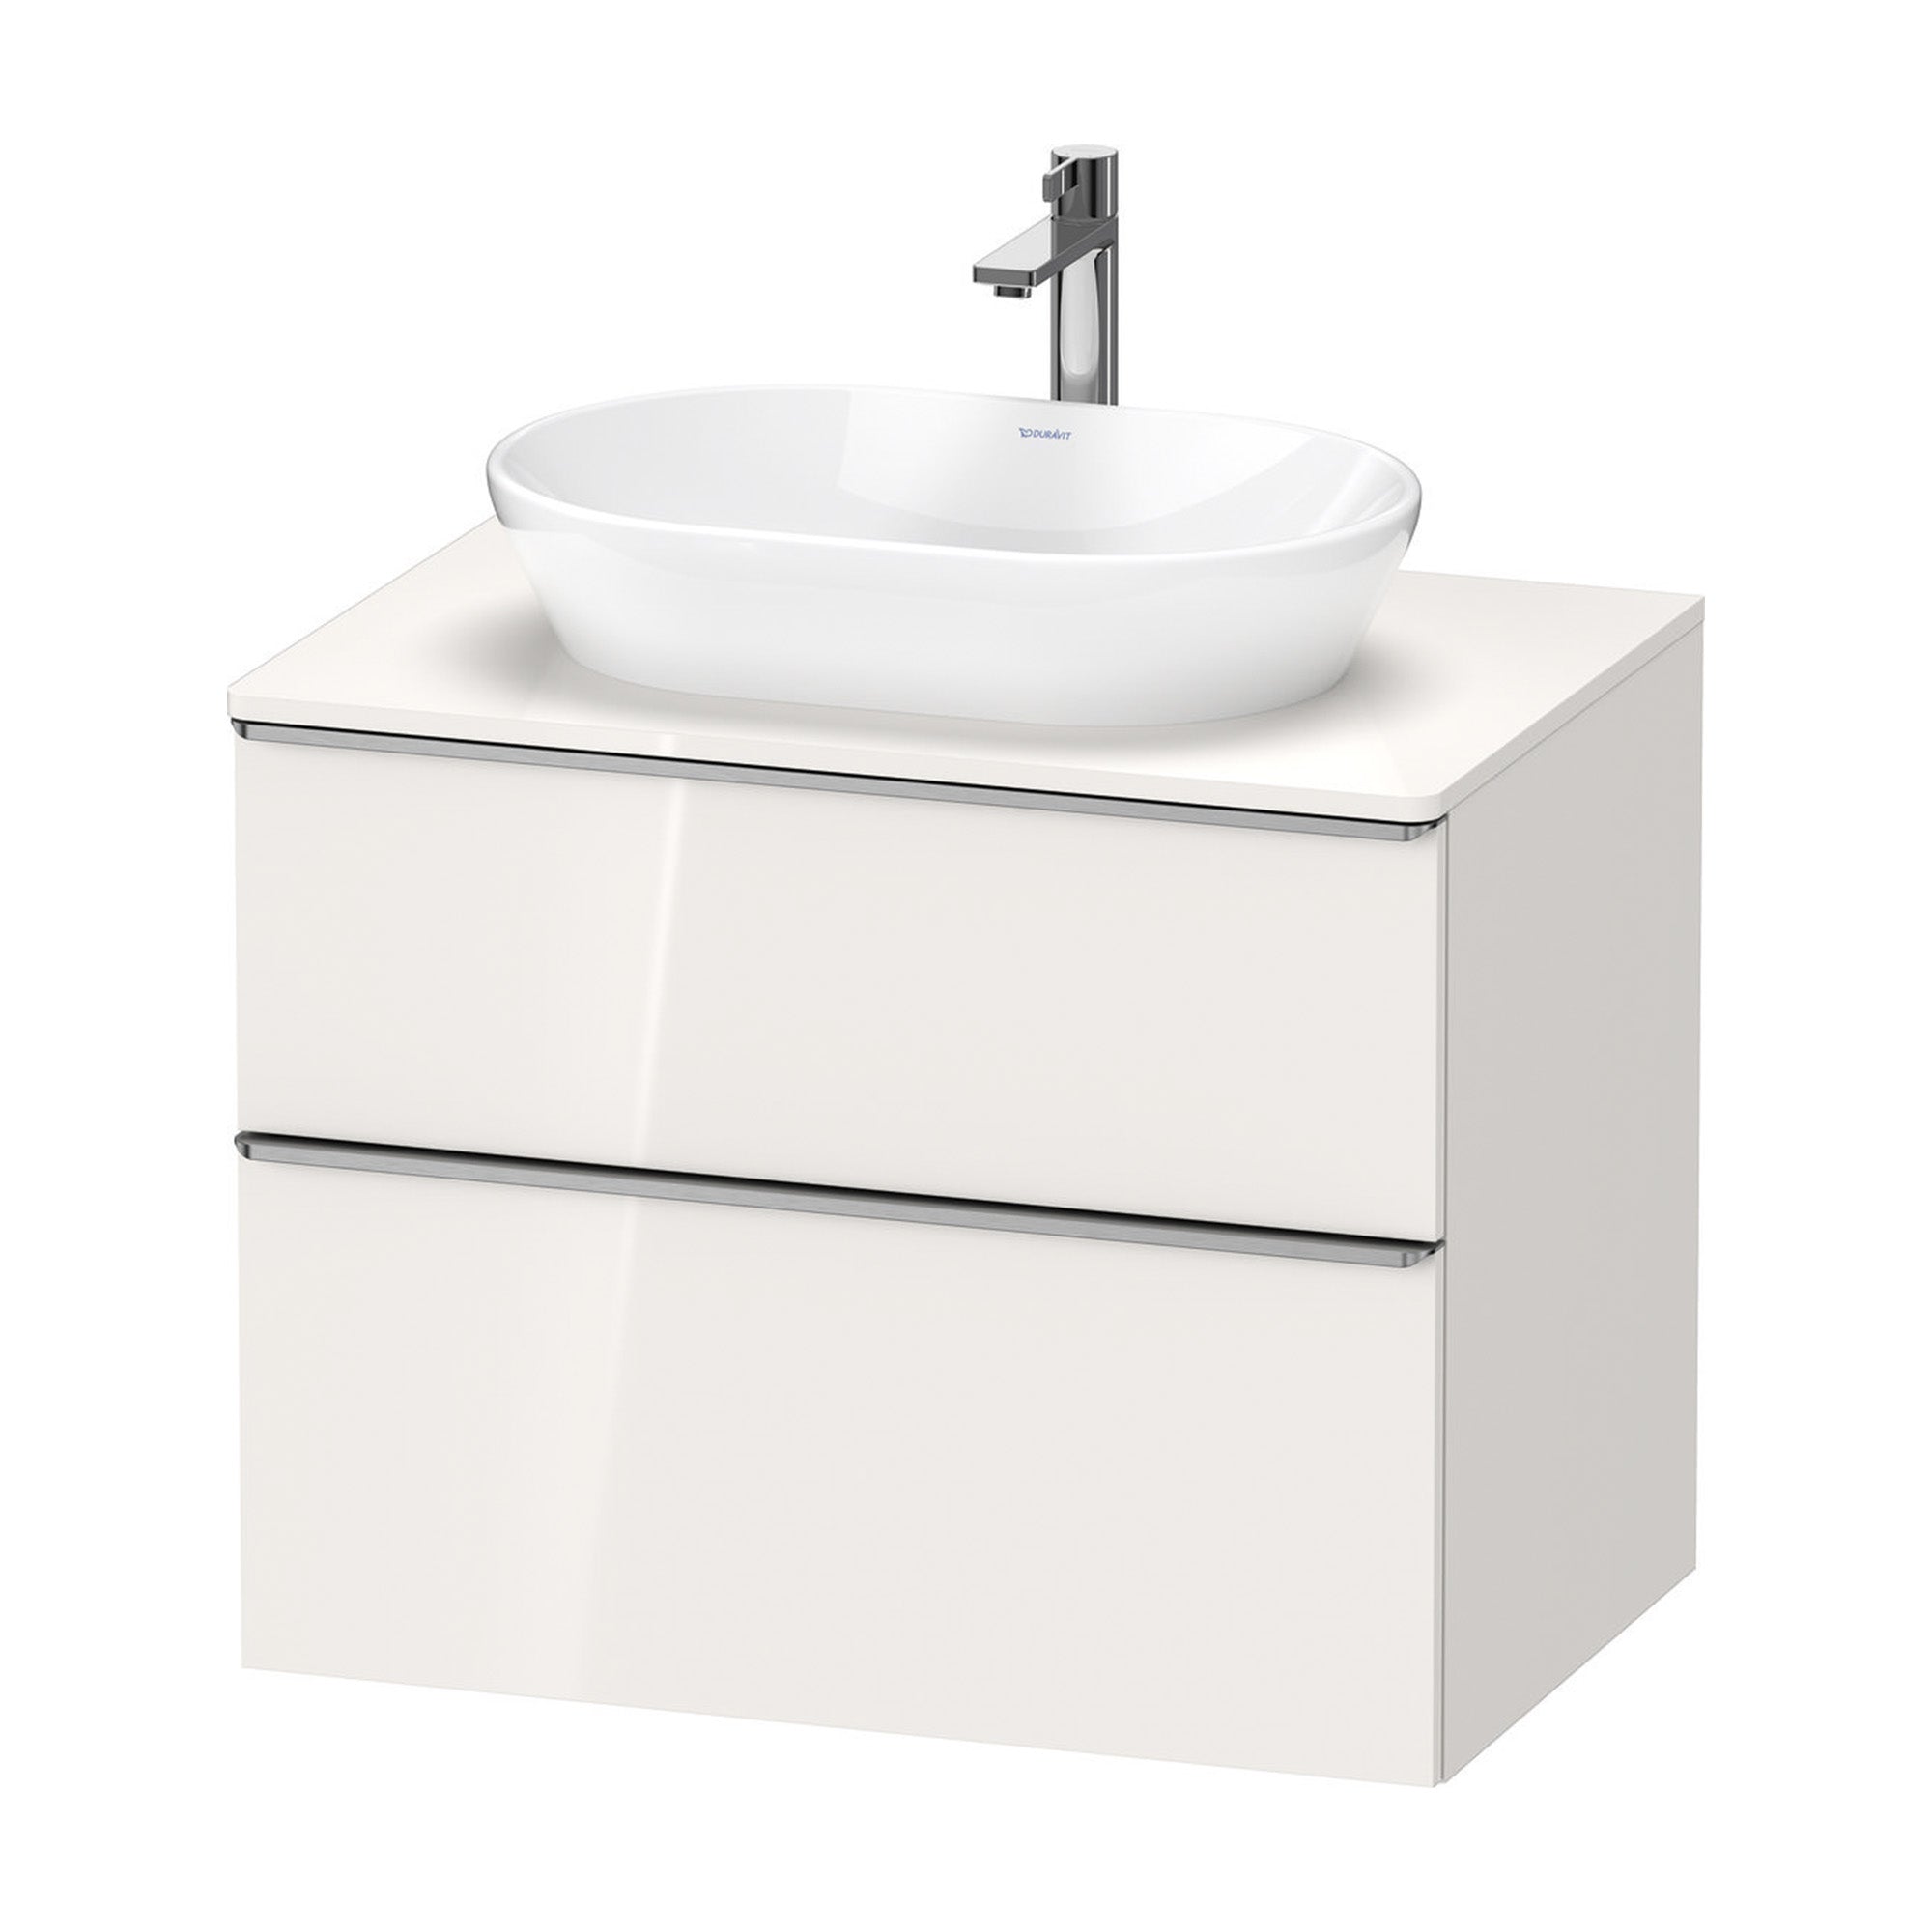 duravit d-neo 800 wall mounted vanity unit with worktop white gloss stainless steel handles